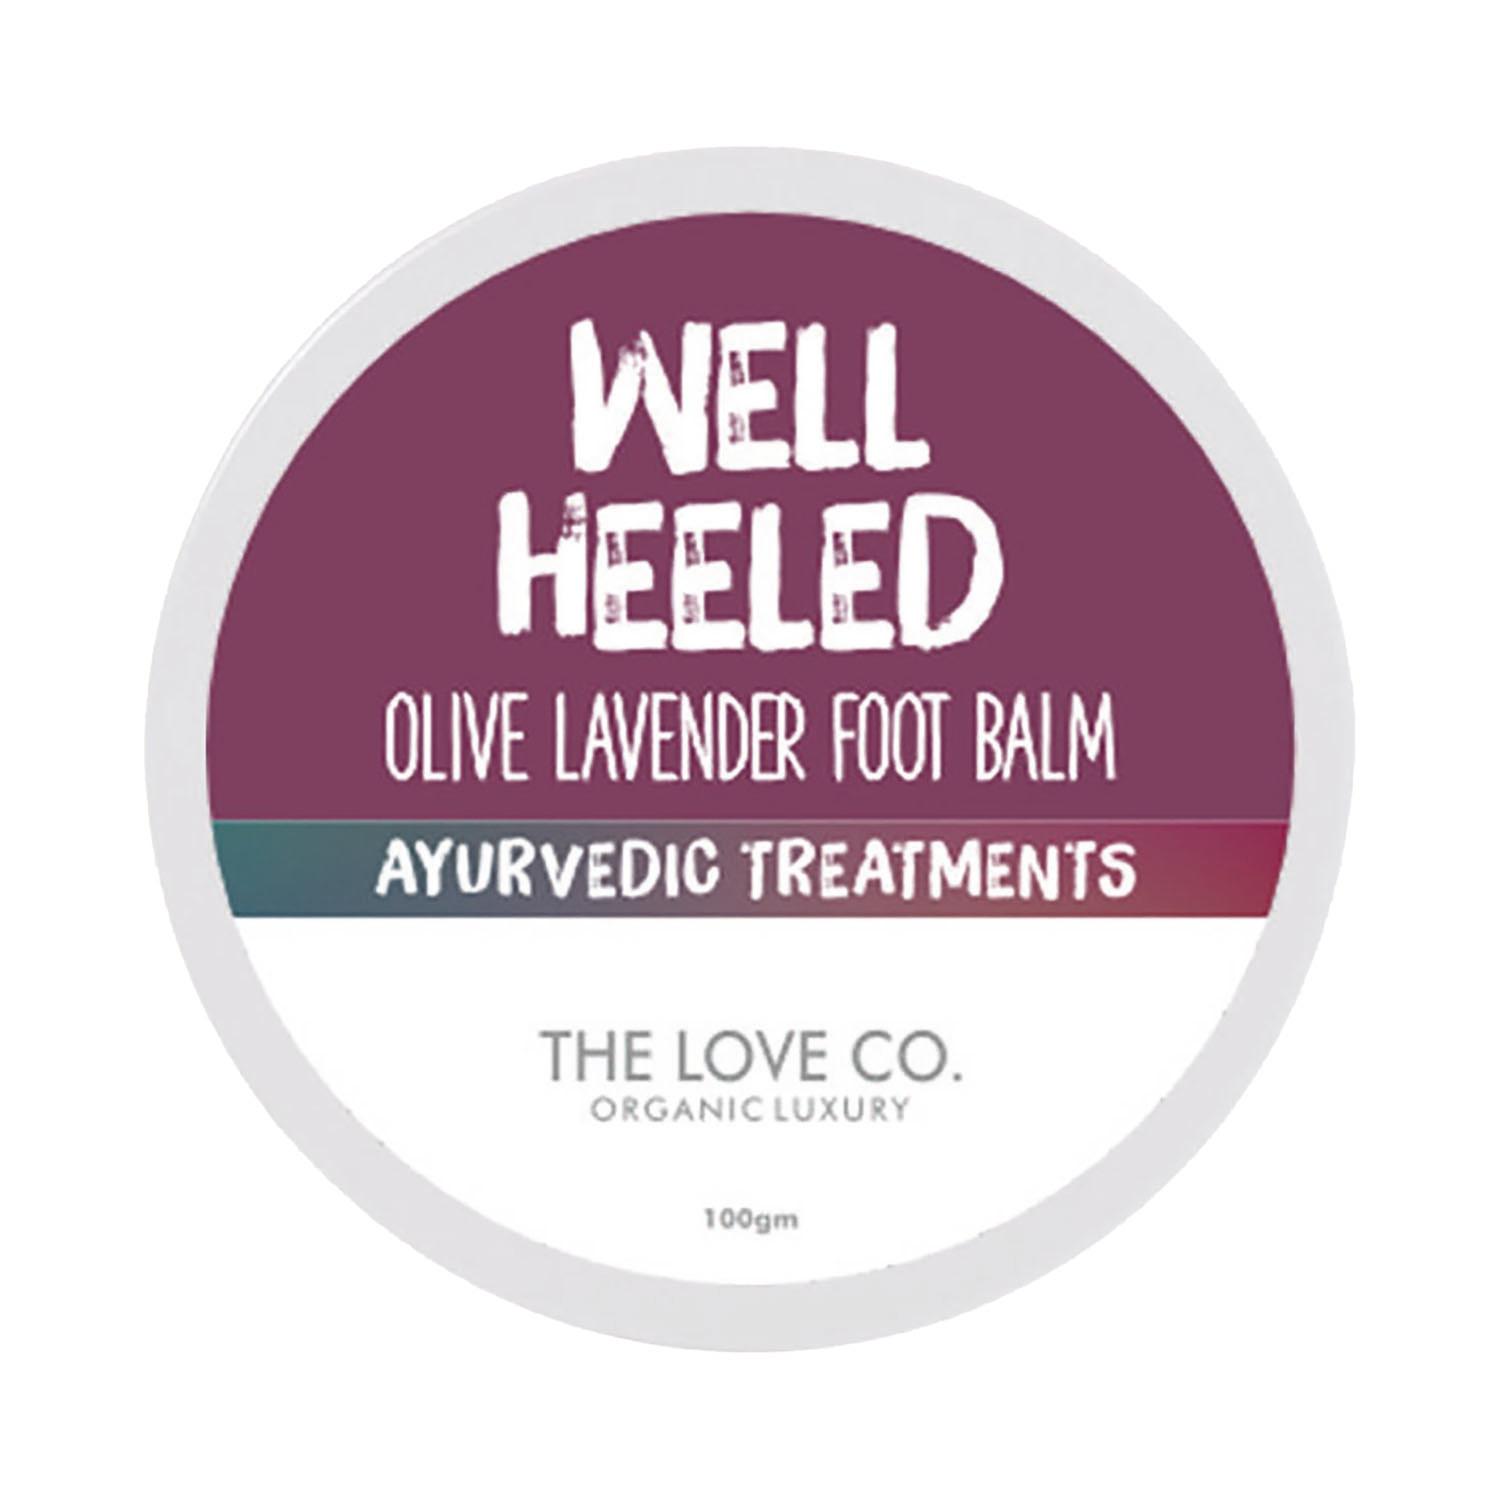 THE LOVE CO. Well Heeled Olive Lavender Foot Balm (100g)